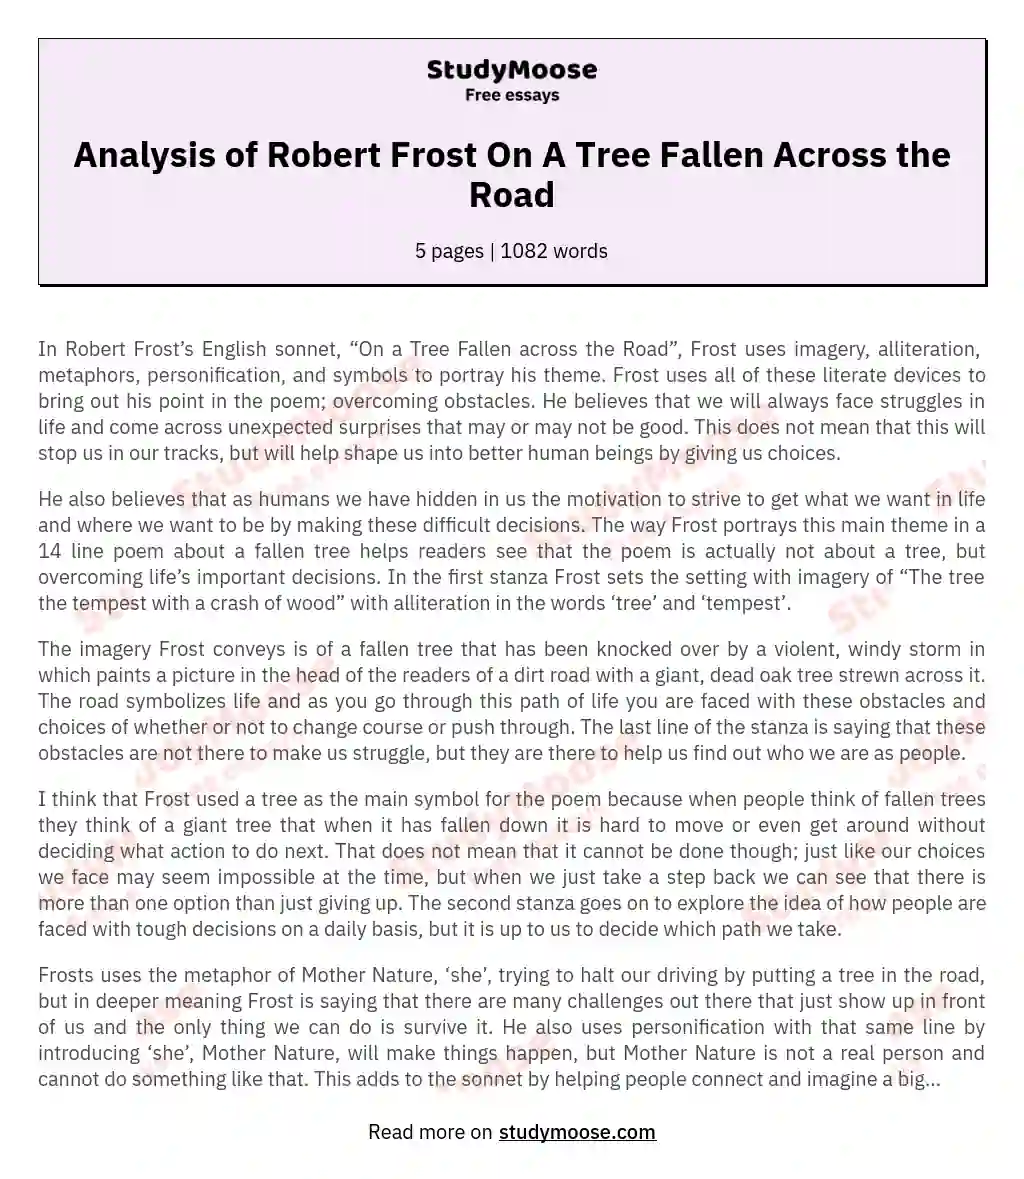 Analysis of Robert Frost On A Tree Fallen Across the Road essay